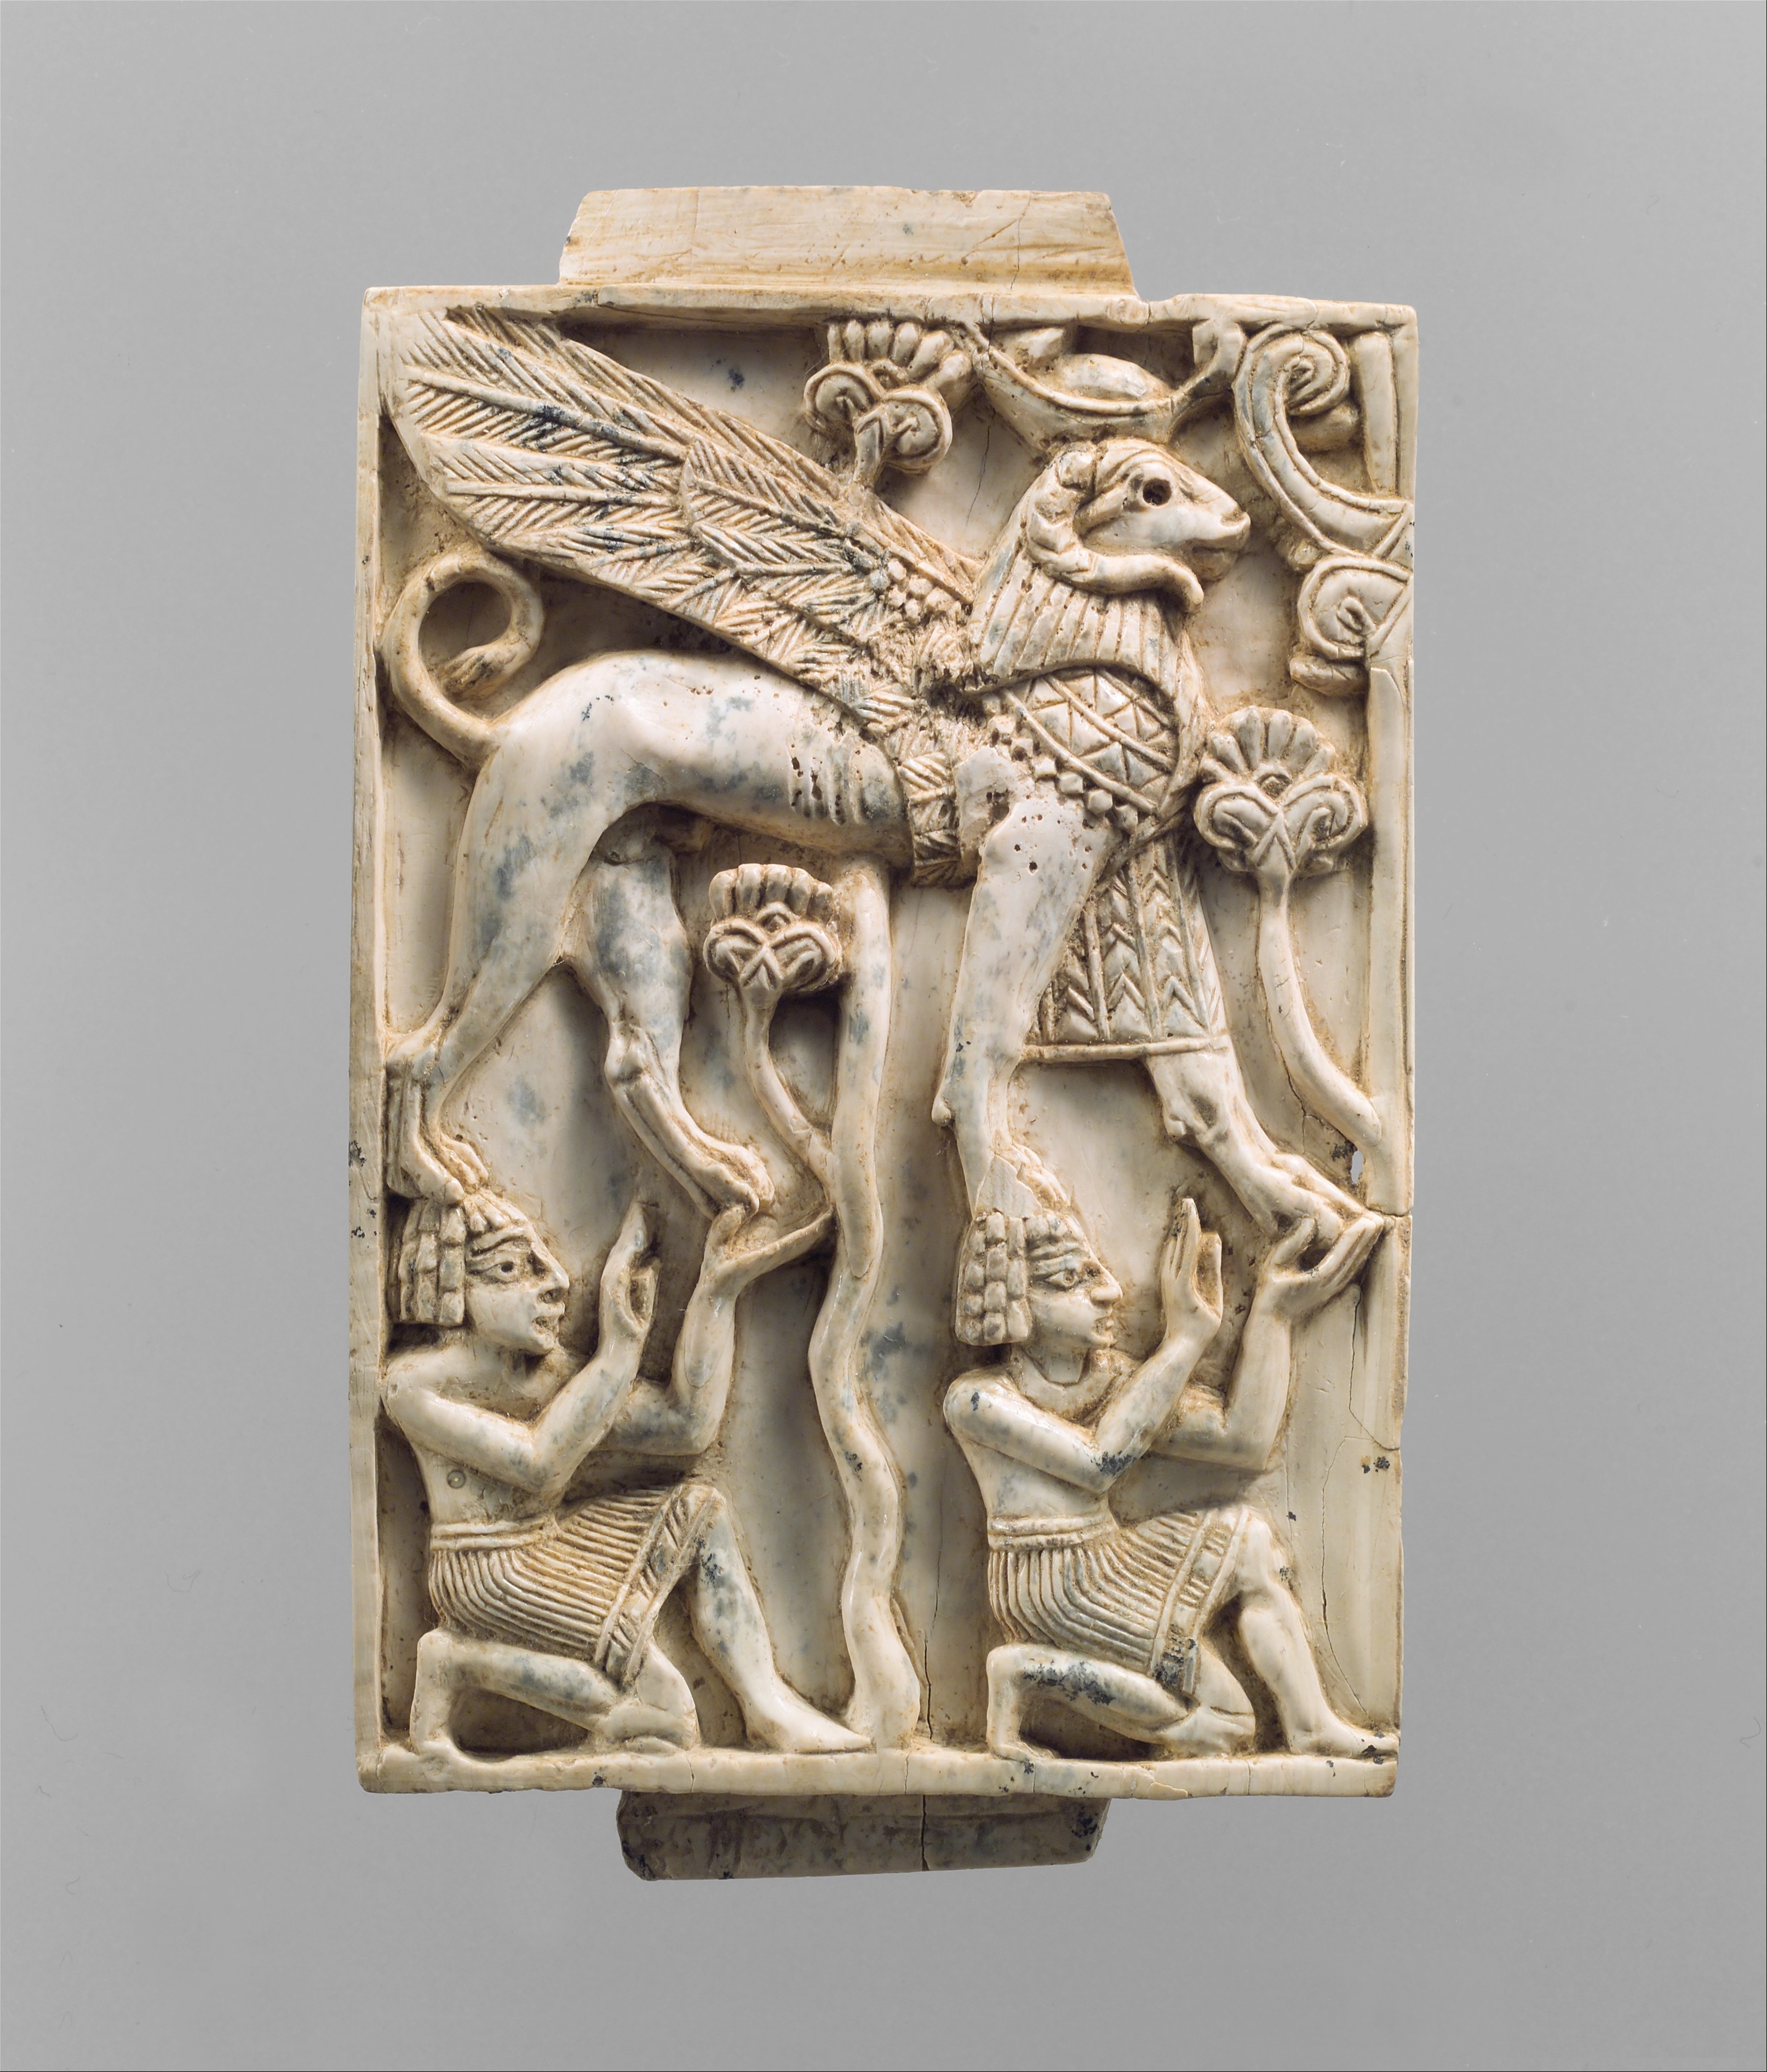 Furniture plaque carved in relief with a striding, ram-headed 